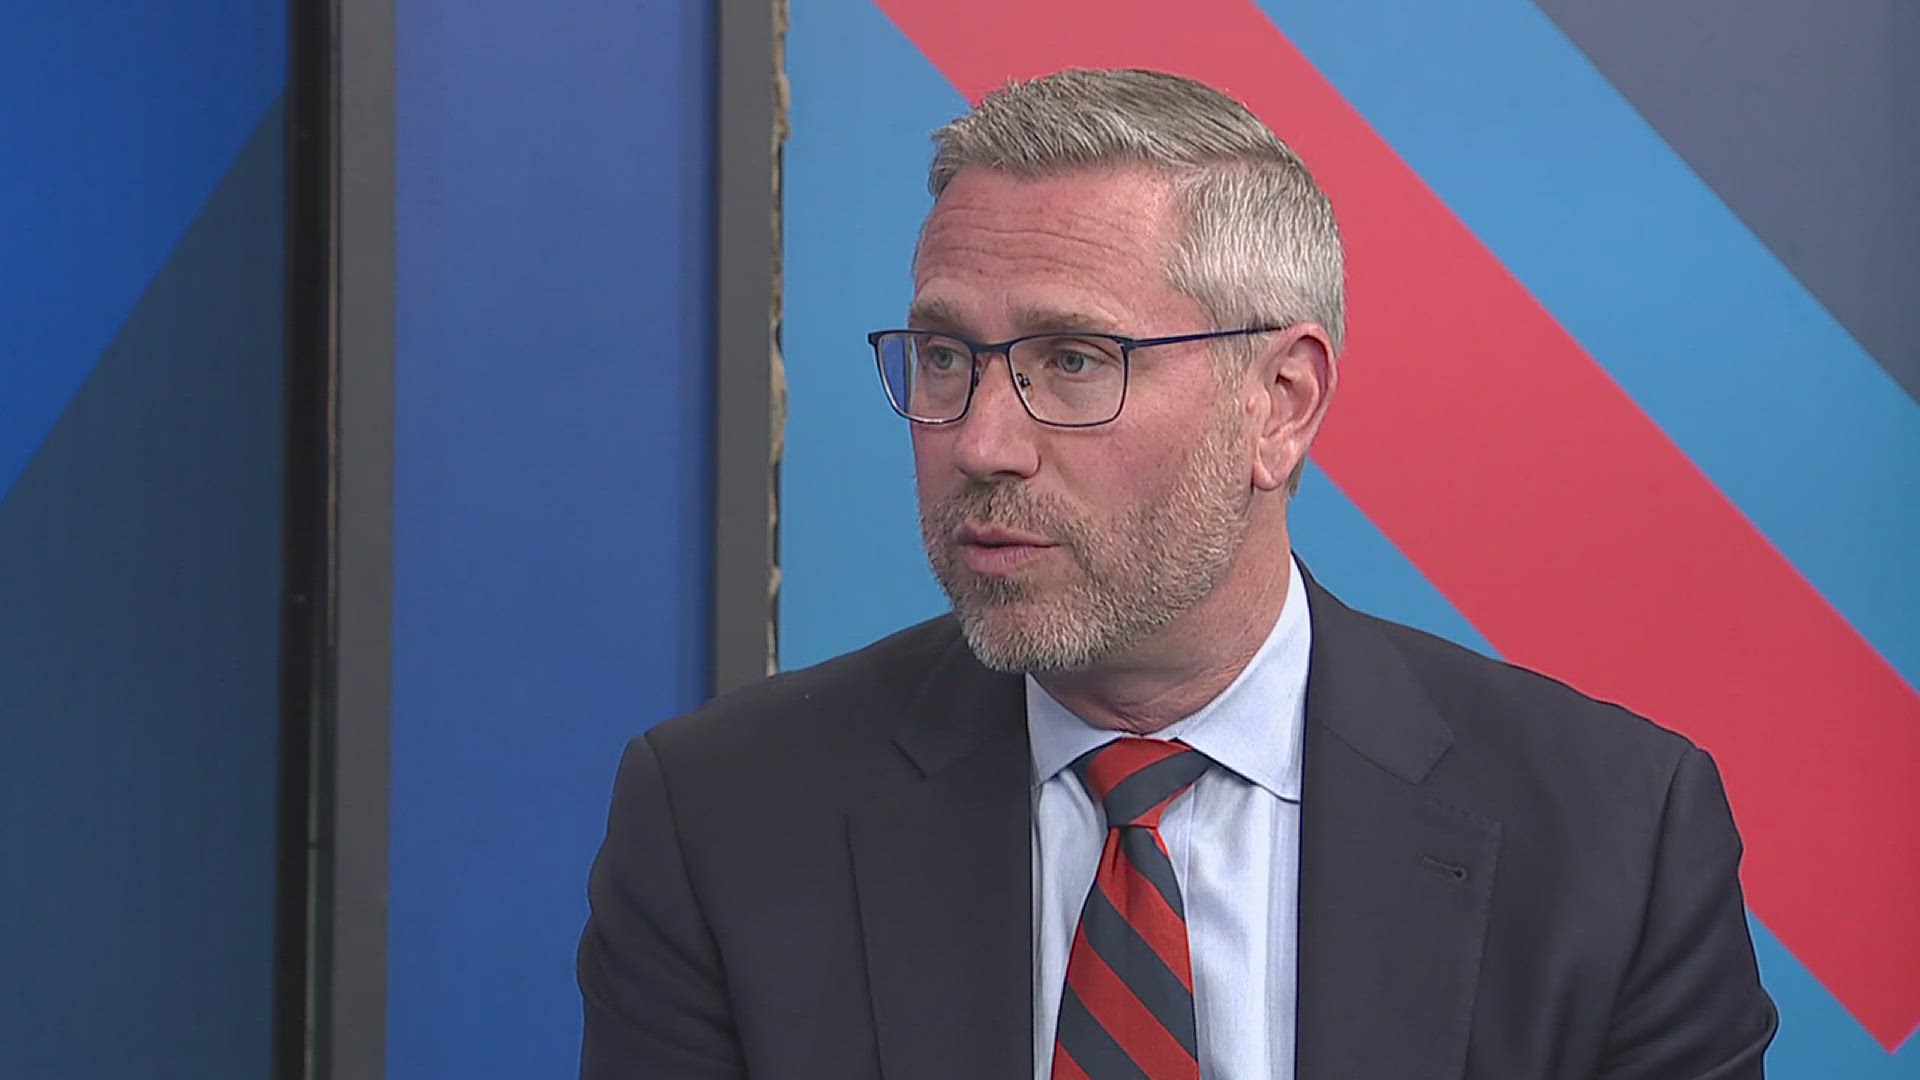 Michael Frerichs discussed legislation making its way through the statehouse and how his office is working to help students with college savings plans.